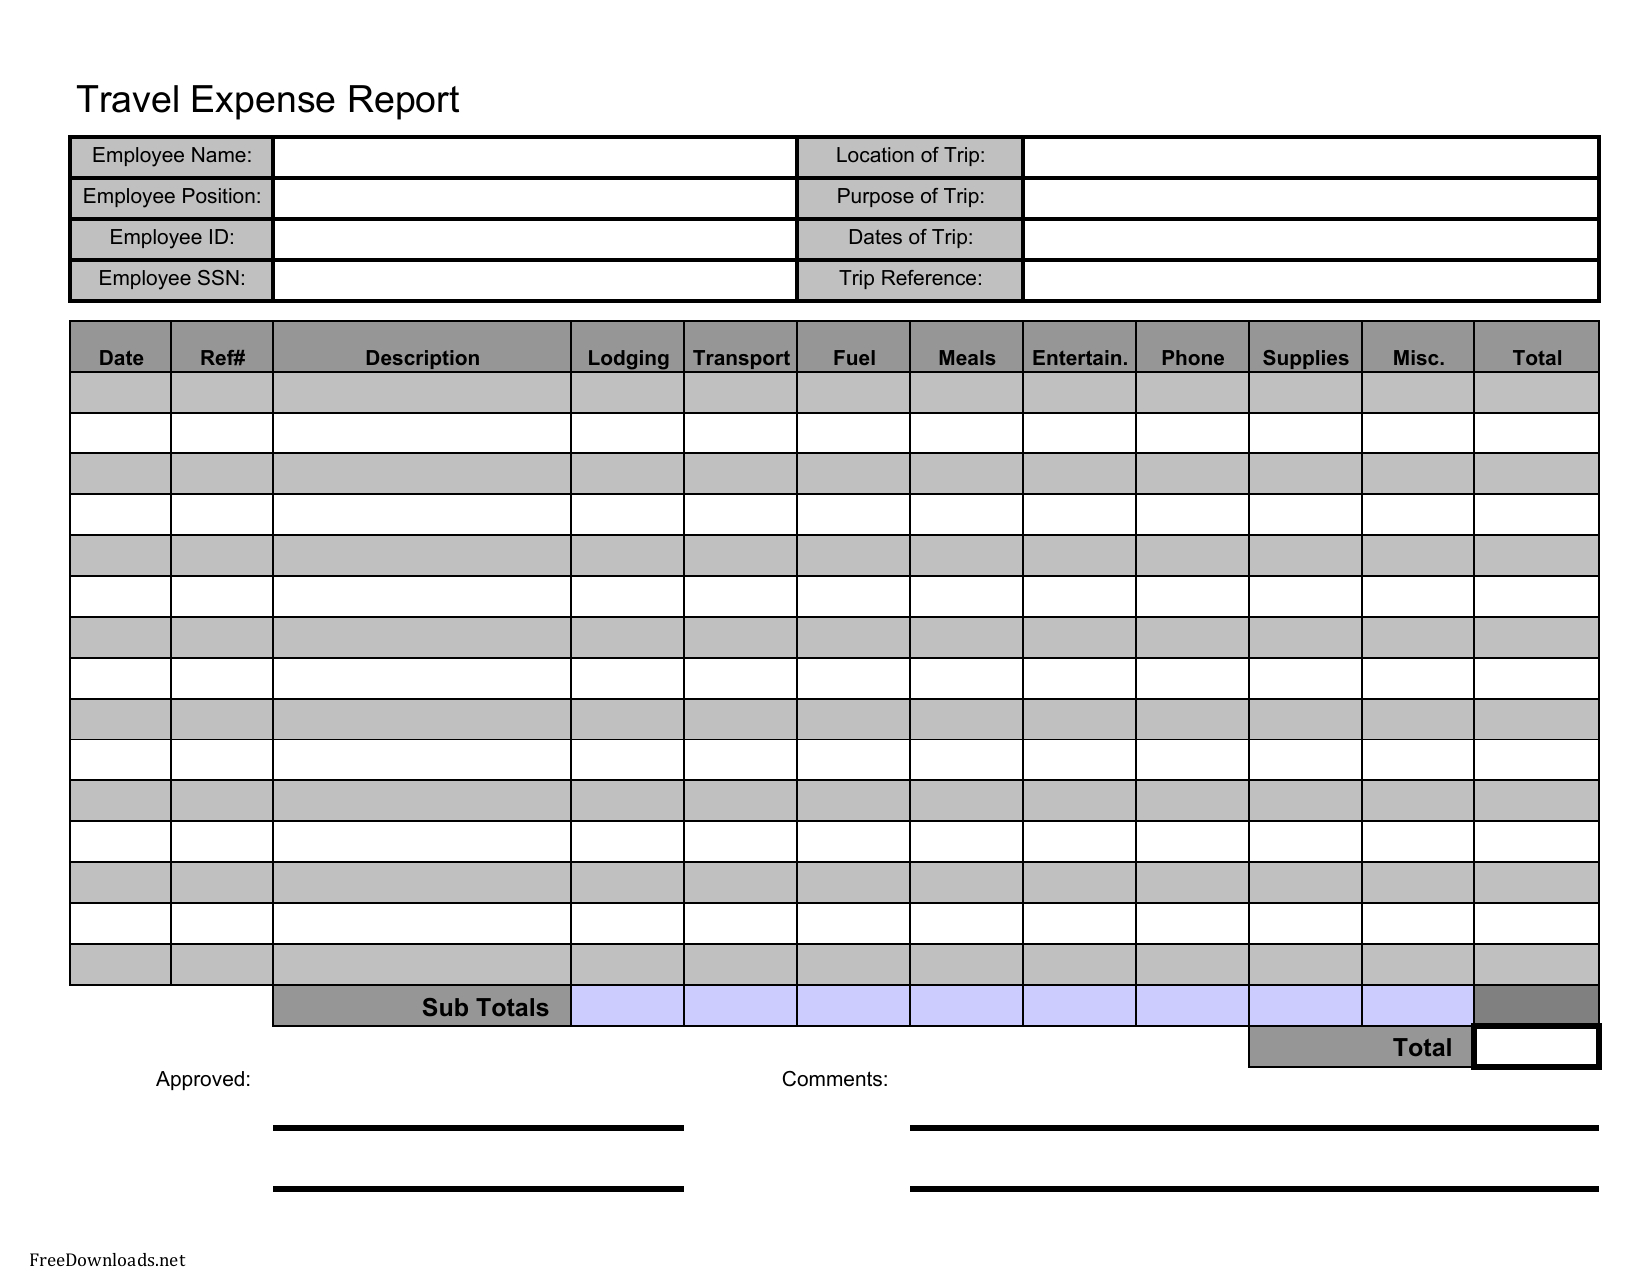 travel-expense-spreadsheet-for-download-travel-expense-report-template